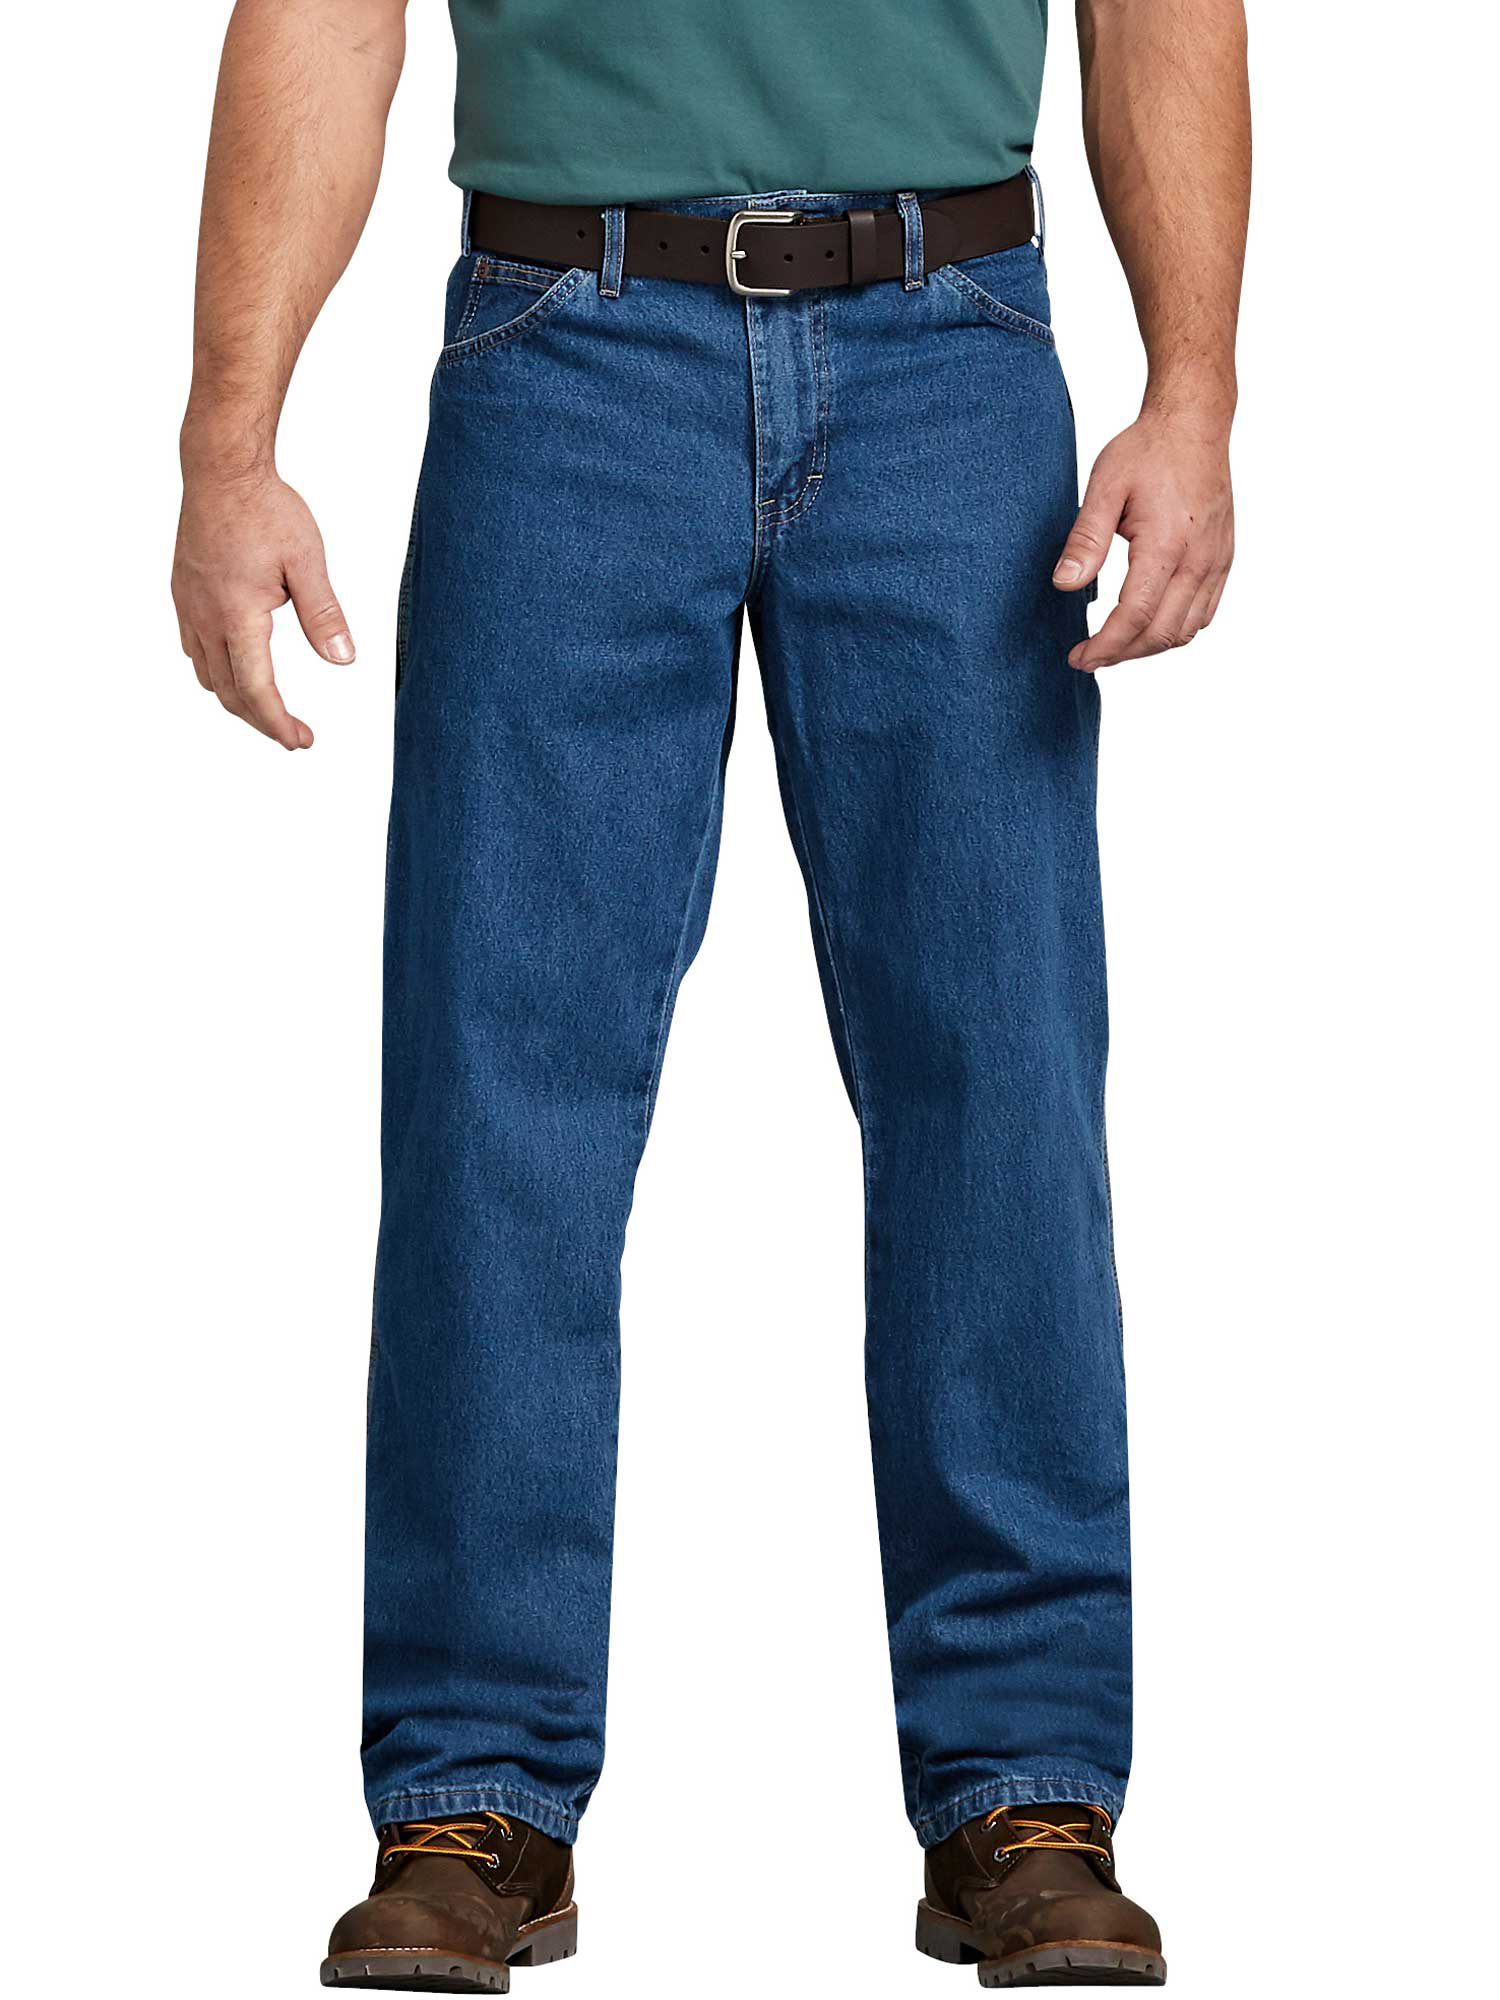 Dickies Mens and Big Mens Relaxed Fit Stonewashed Carpenter Denim Jeans - image 1 of 3